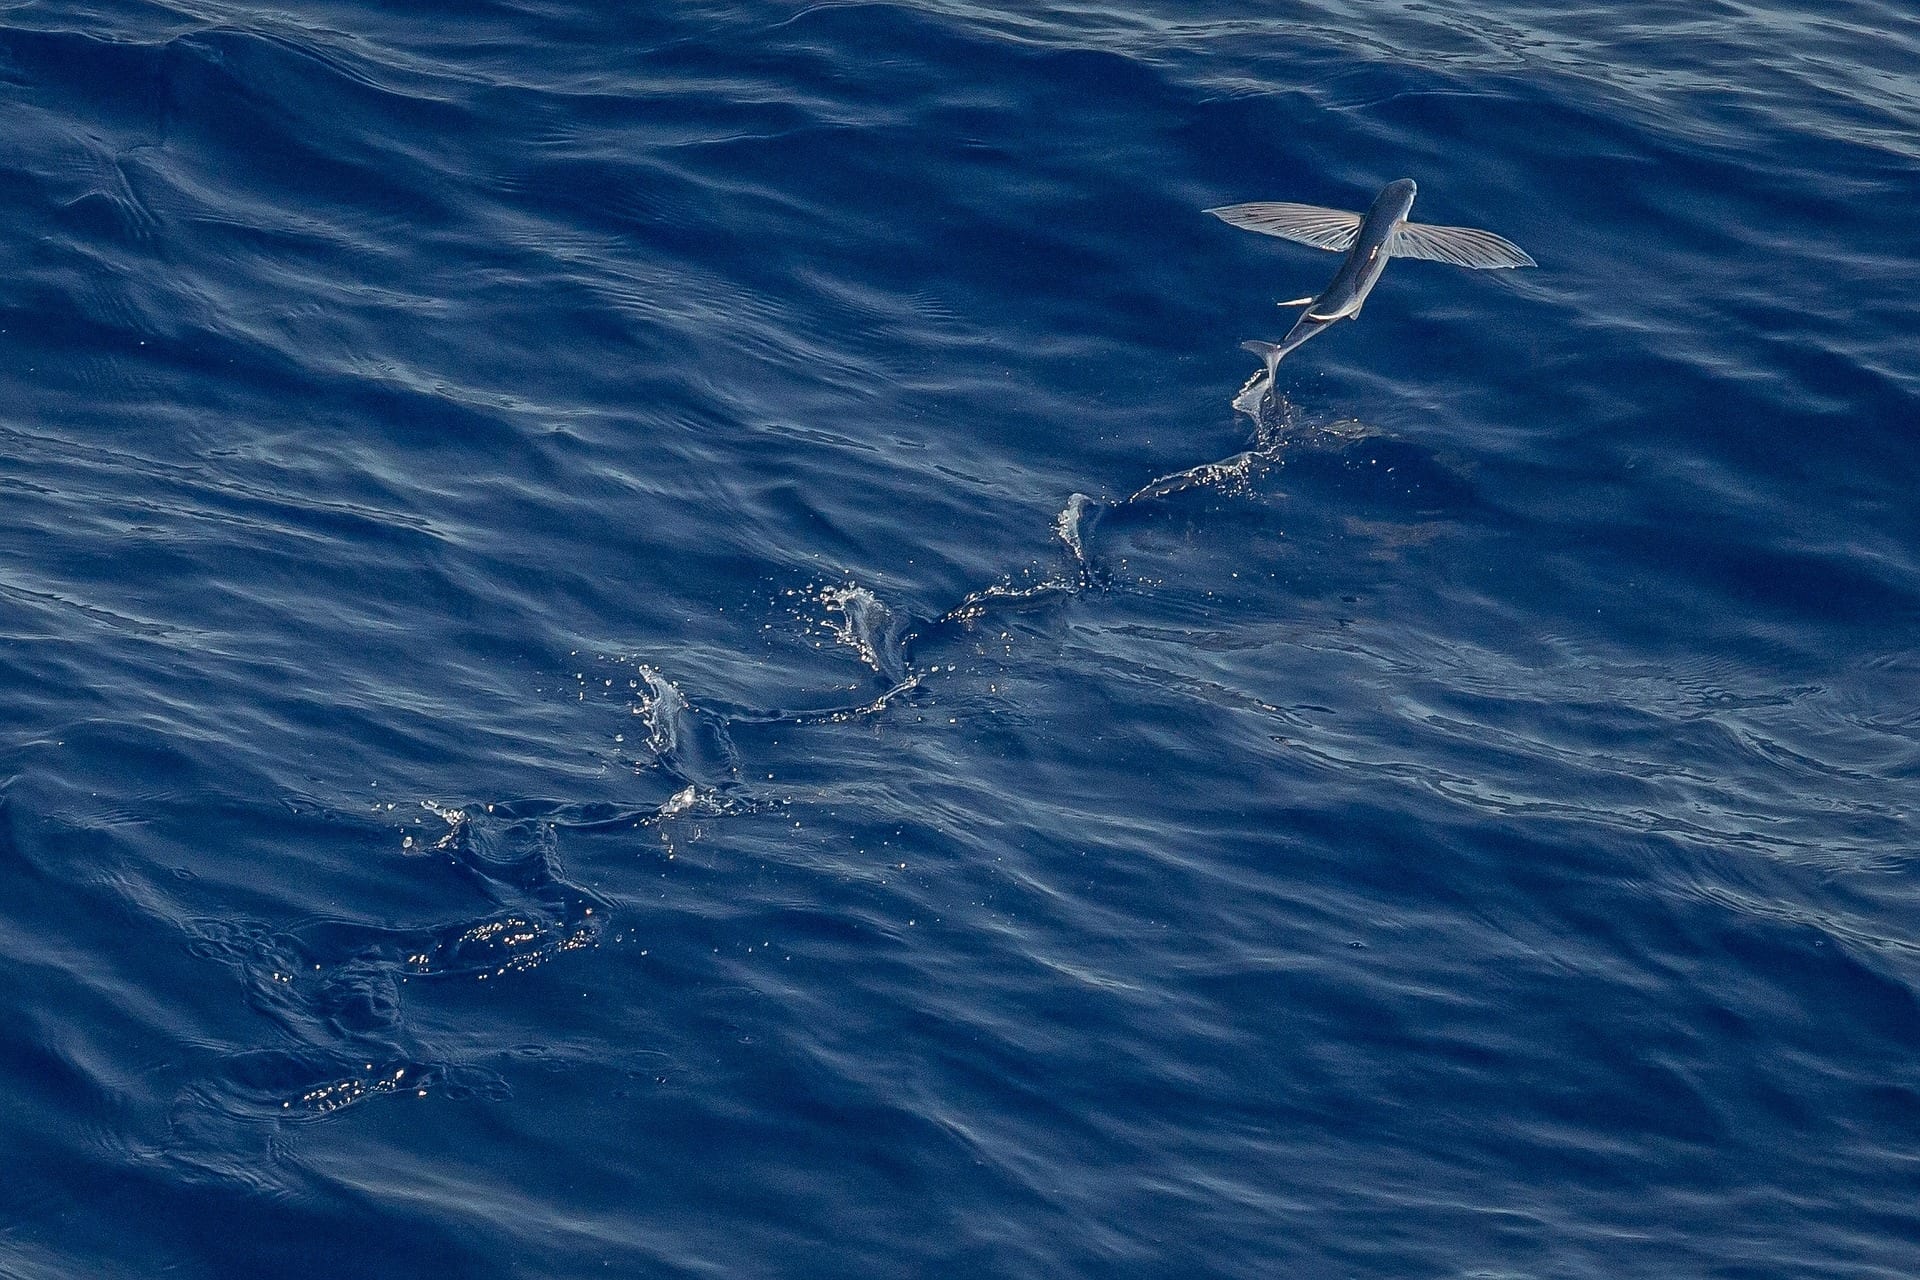 Do Flying Fish Really Fly? (Questions and Answers About Animals